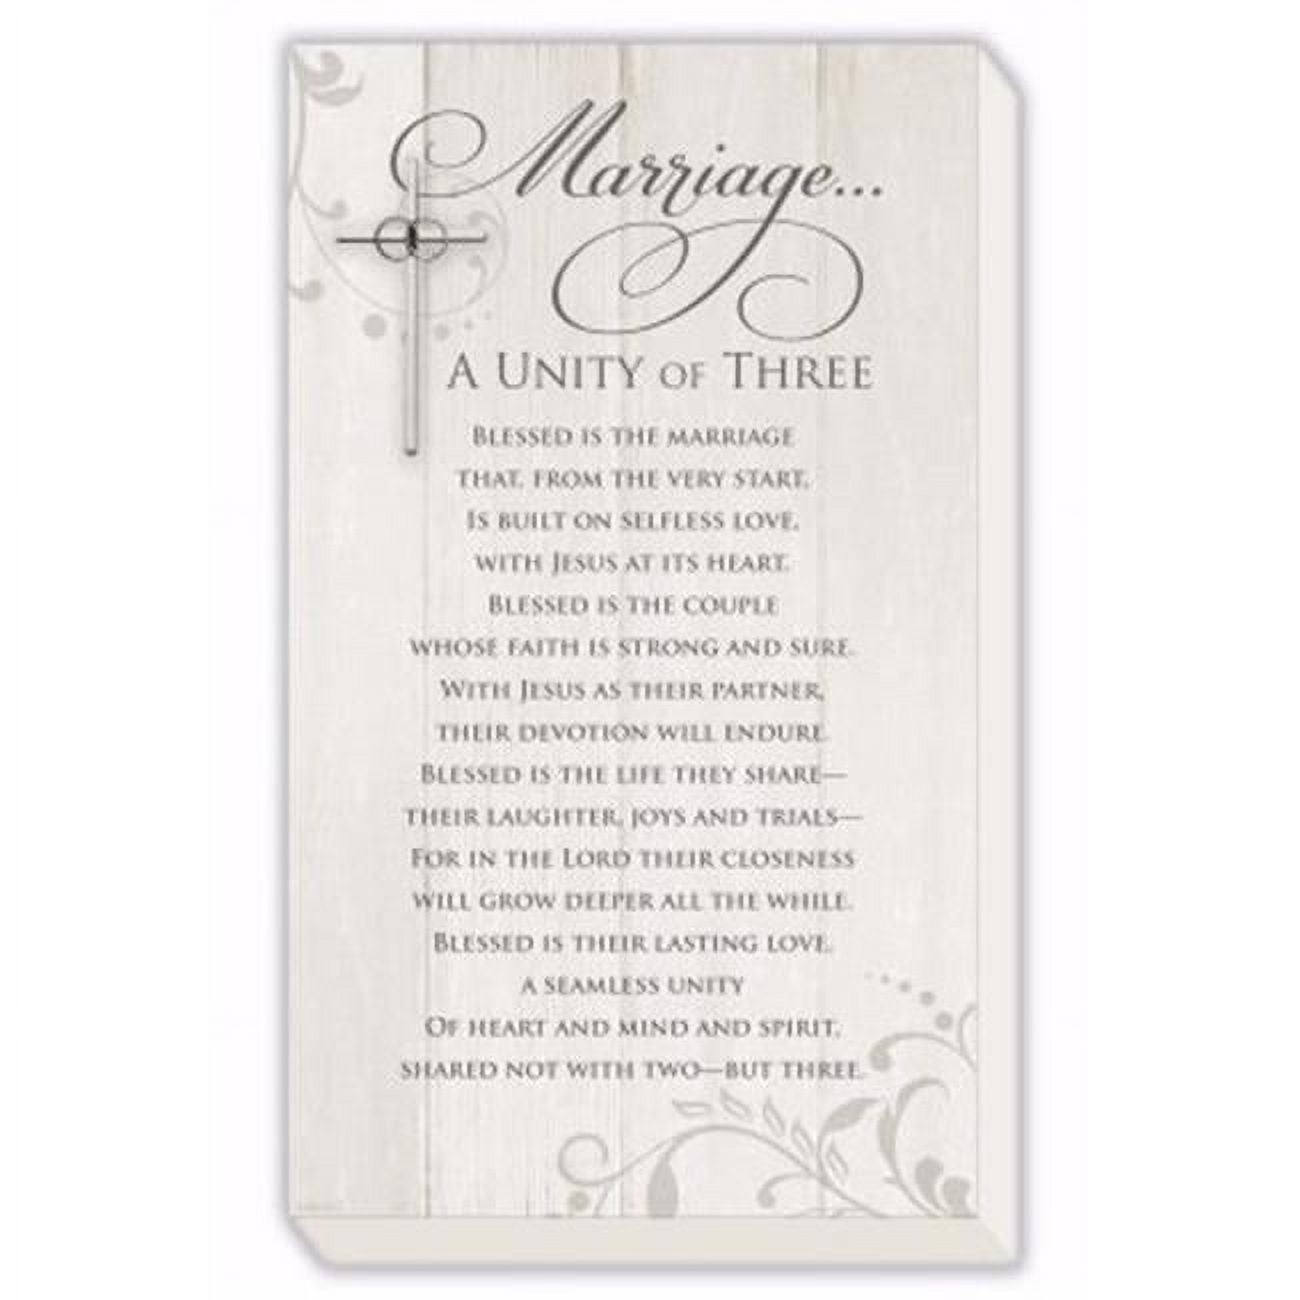 Ca Gift - Dba Abbey Gift 152479 Plaque Marriage - 10 X 17 X 1.75 In.